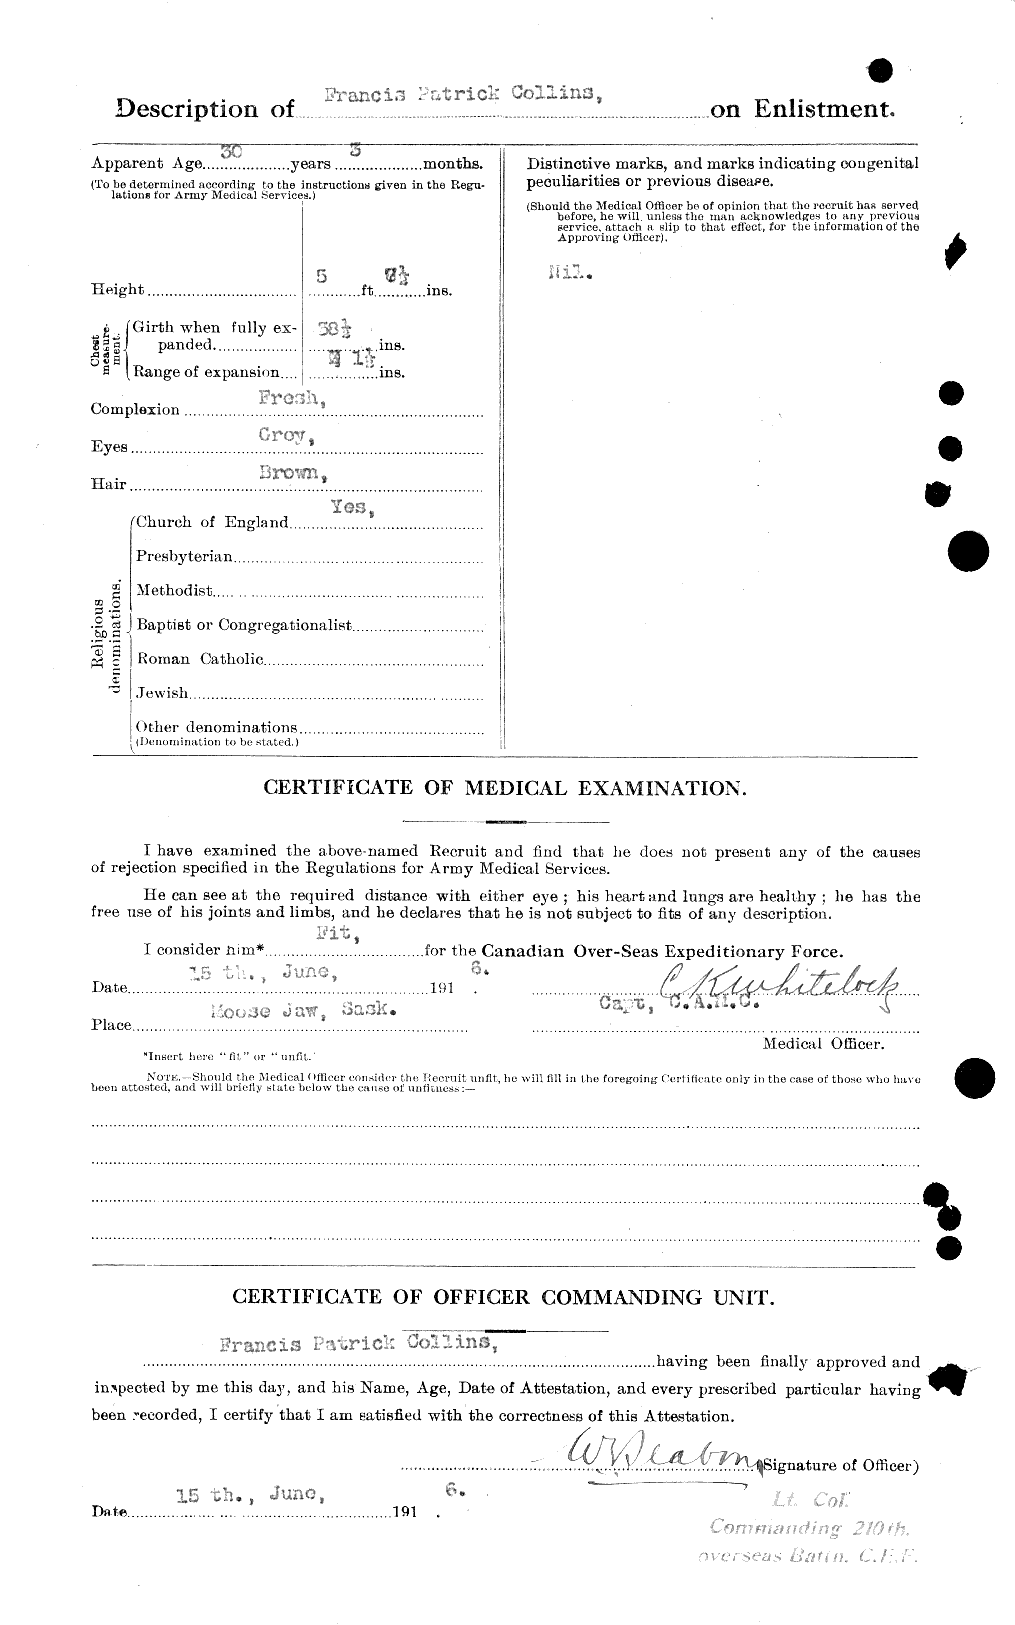 Personnel Records of the First World War - CEF 037817b